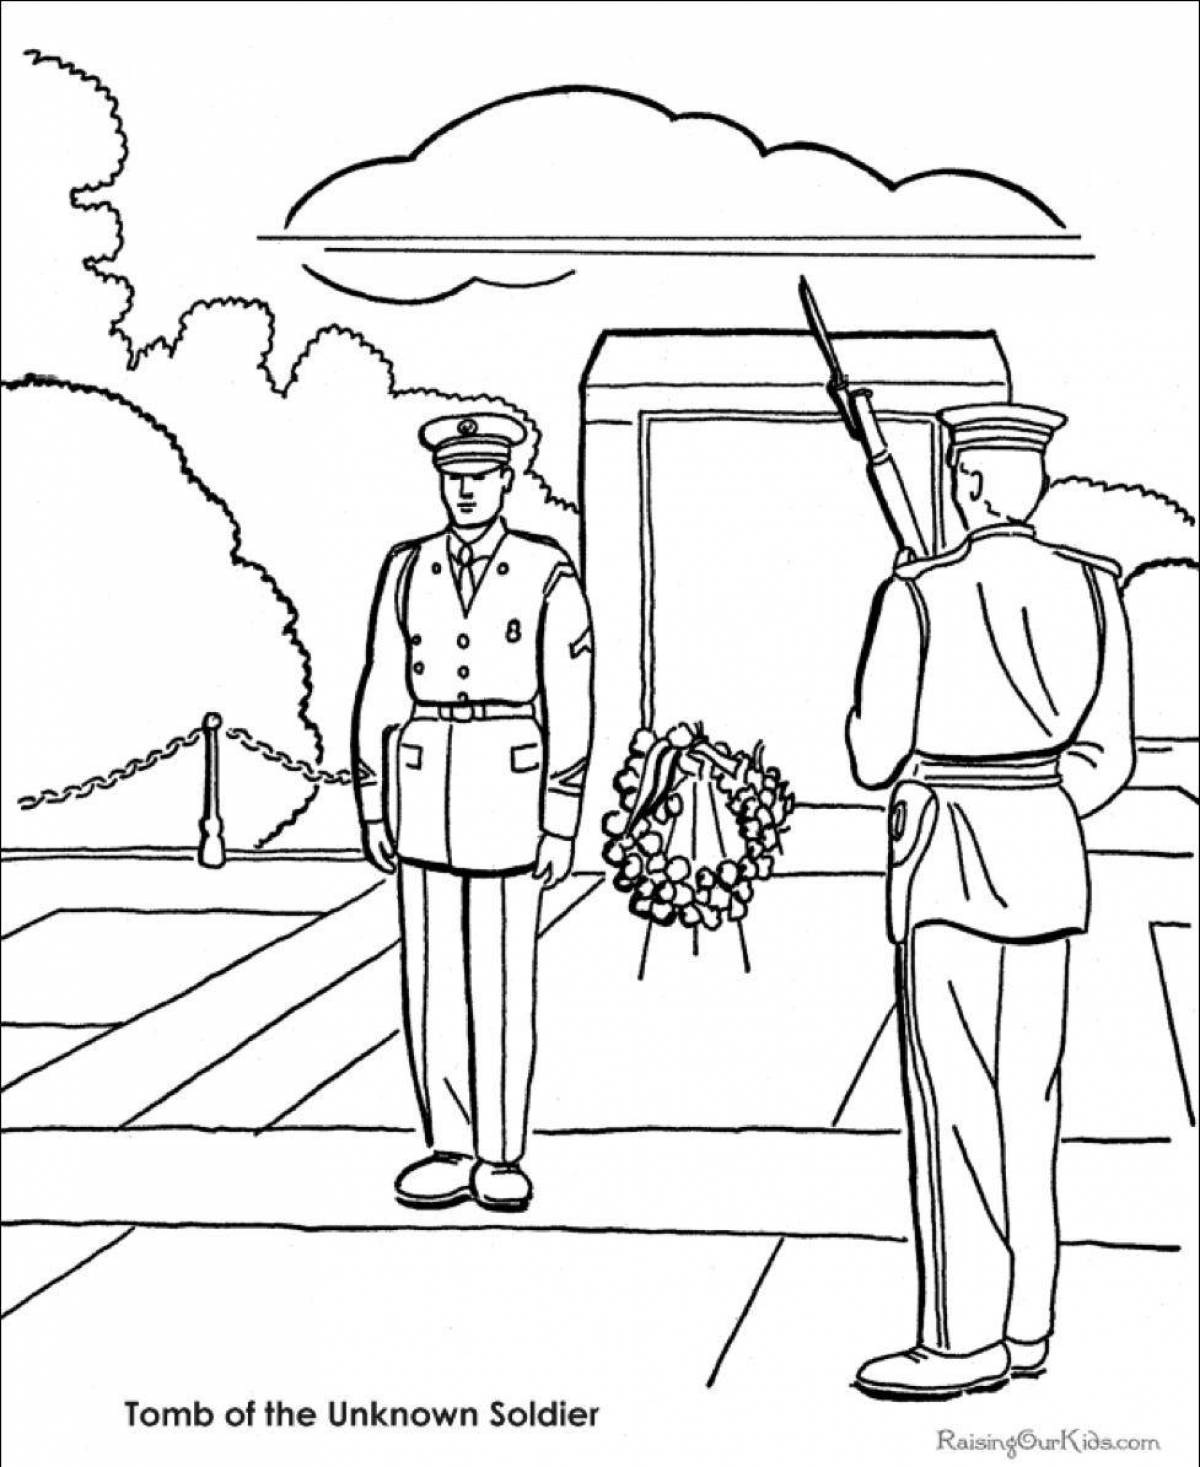 Coloring book exalted flowers for war heroes